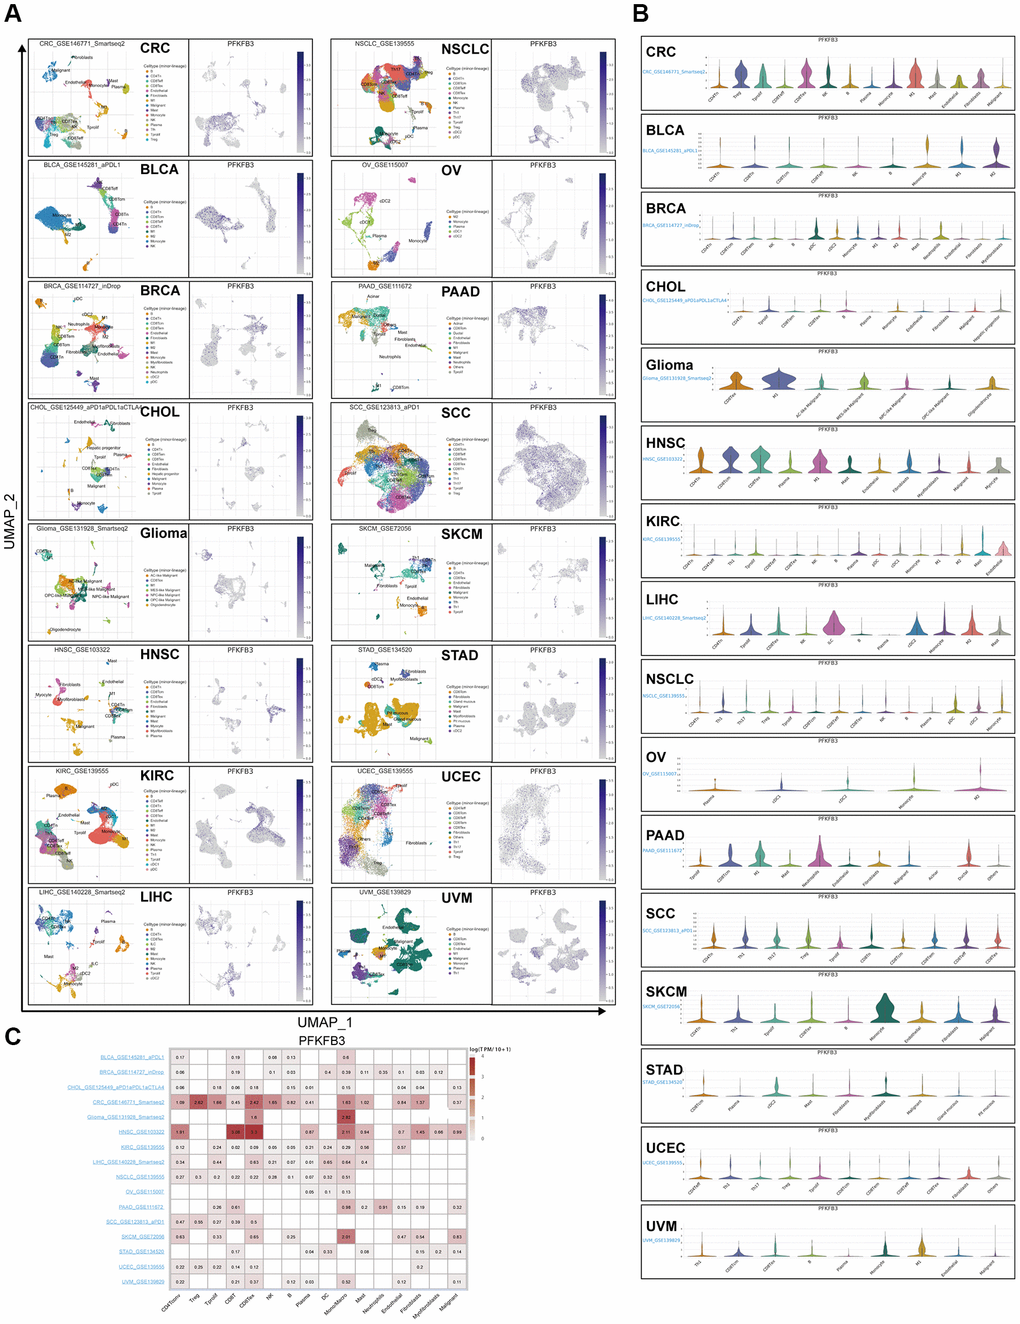 Single-cell analyze the characteristic of the PFKFB3 expression in pan-cancer. (A) The visualized single-cell UMAP plots are to show the cell distribution of treatment response groups (left) and the expression of PFKFB3 (right). (B) The grid violin plot reflects the distribution of PFKFB3 expression in different cell types across all datasets with various cancers. (C) The heatmap reflects the distribution of PFKFB3 expression in different cell types across all datasets with various cancers.